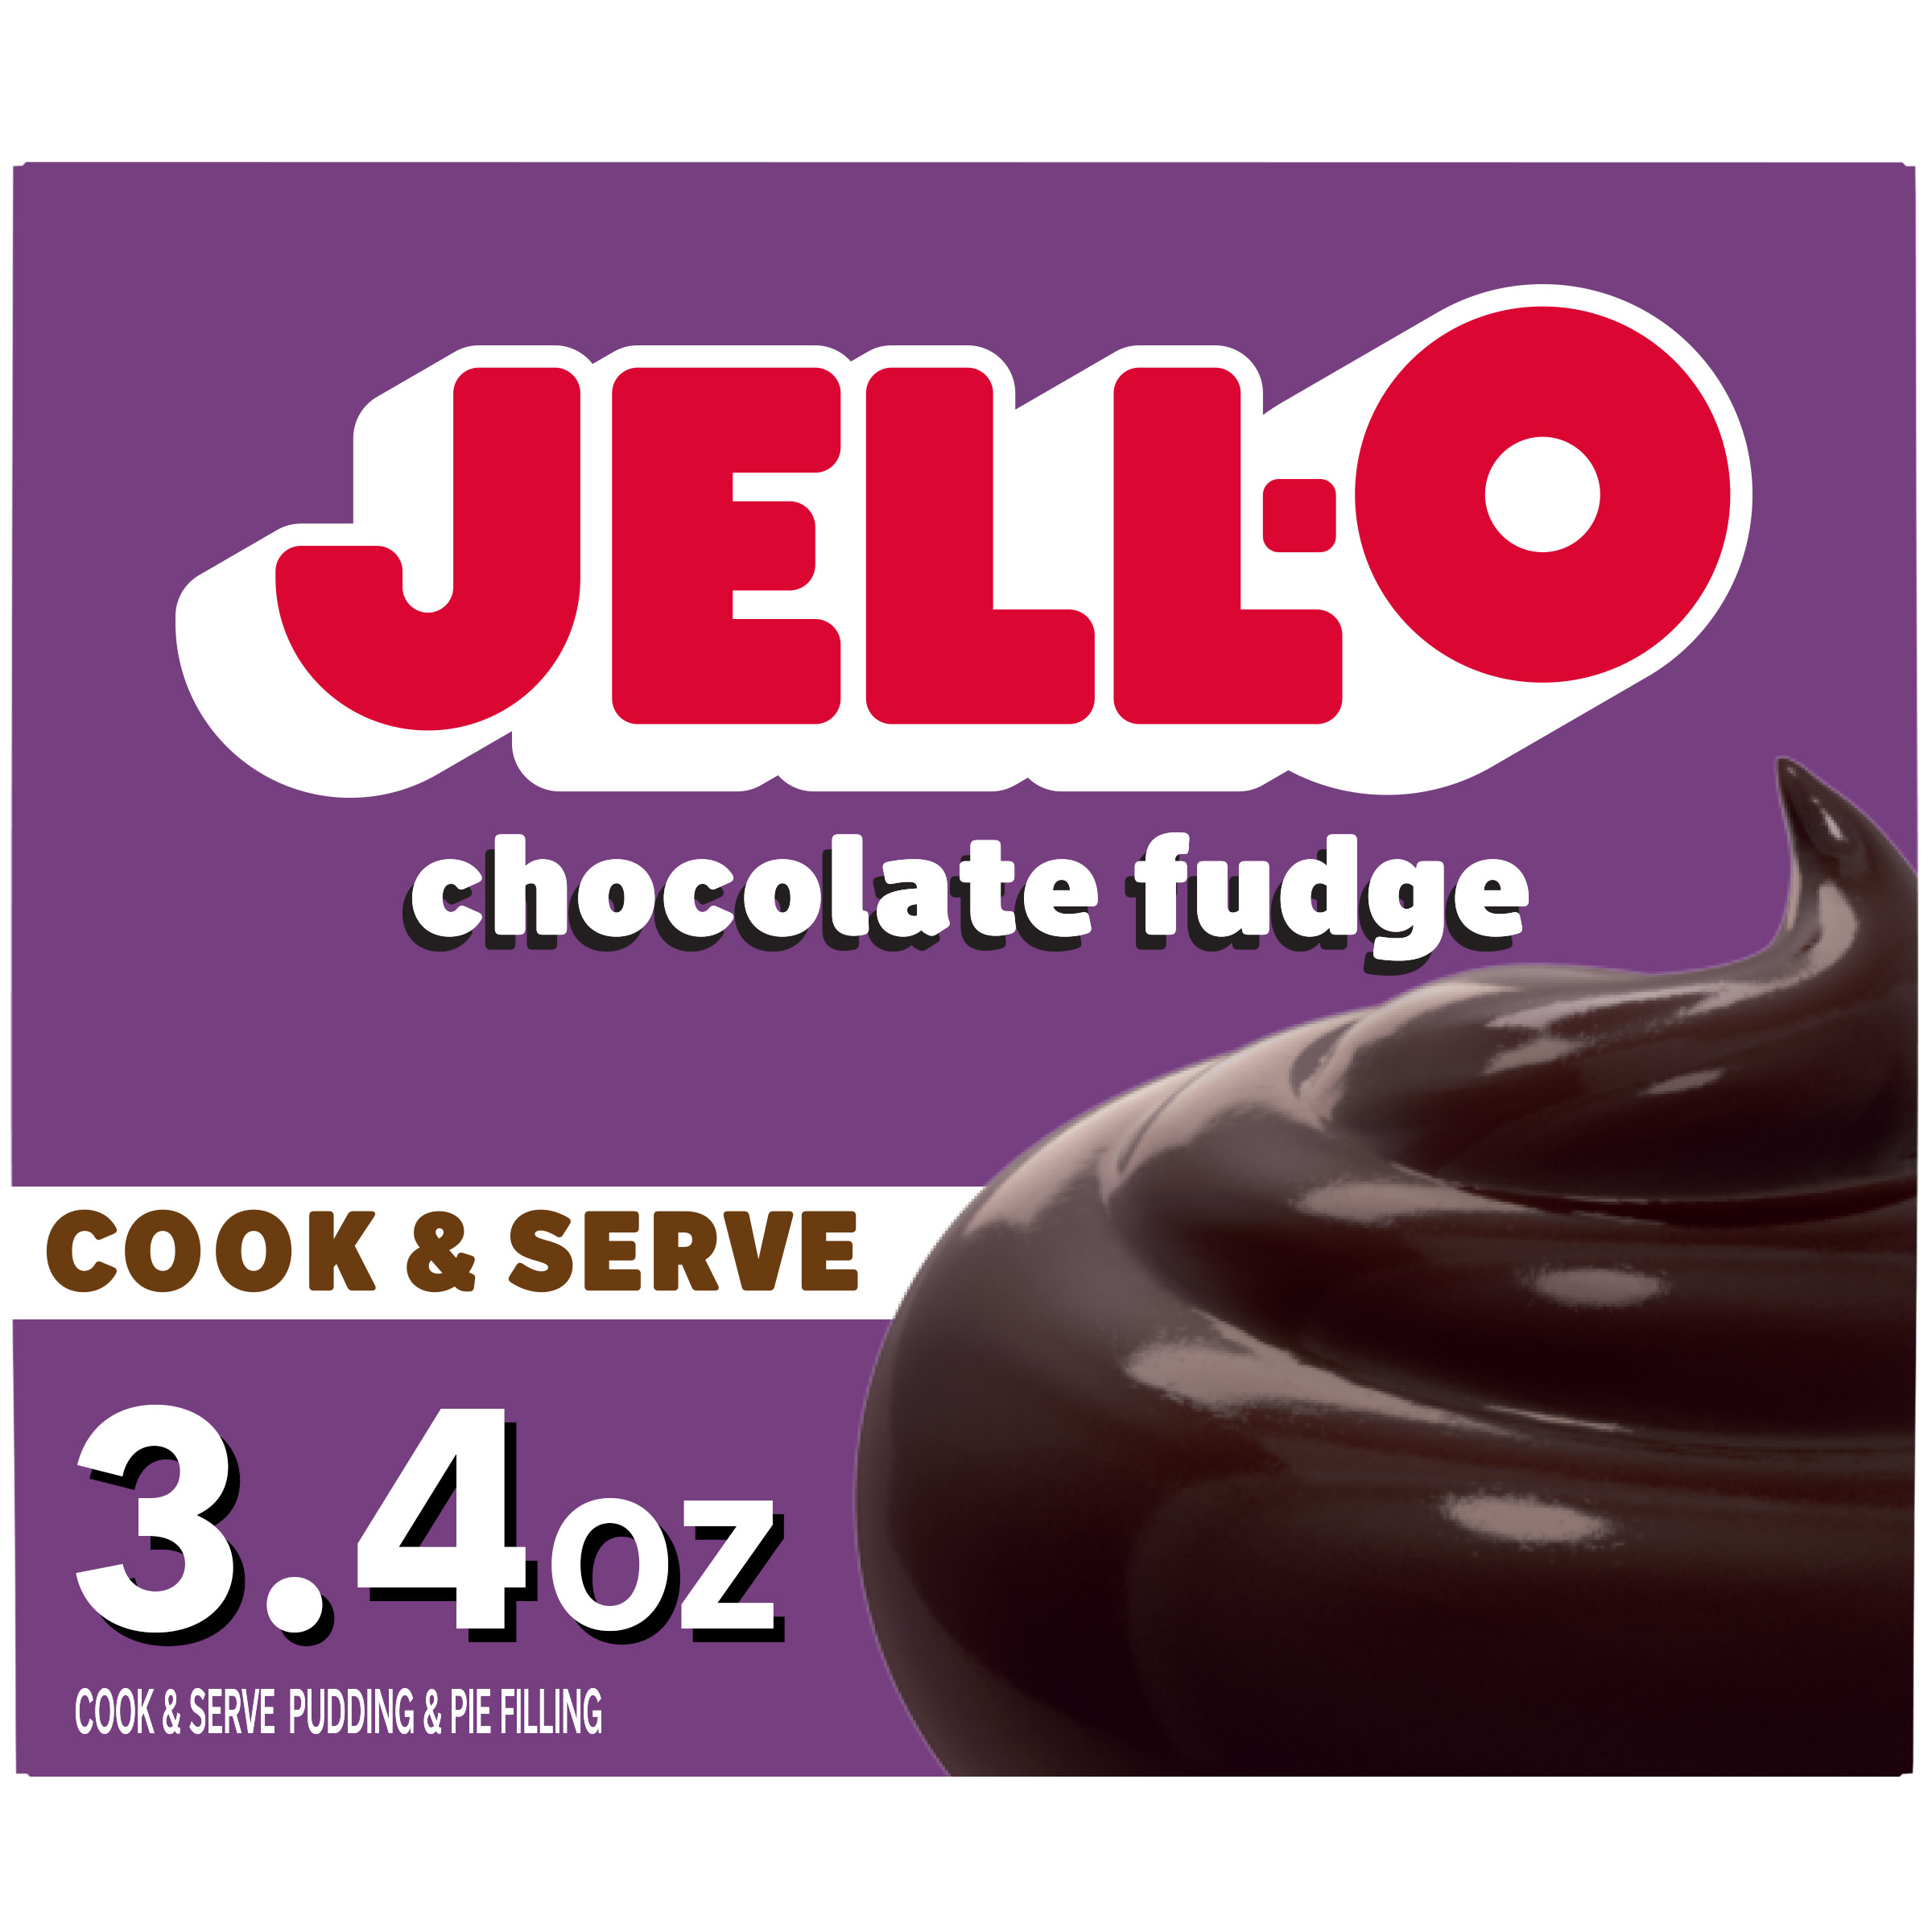 Jell-O Cook & Serve Chocolate Fudge Artificially Flavored Pudding & Pie Filling Mix, 3.4 oz Box - image 1 of 14